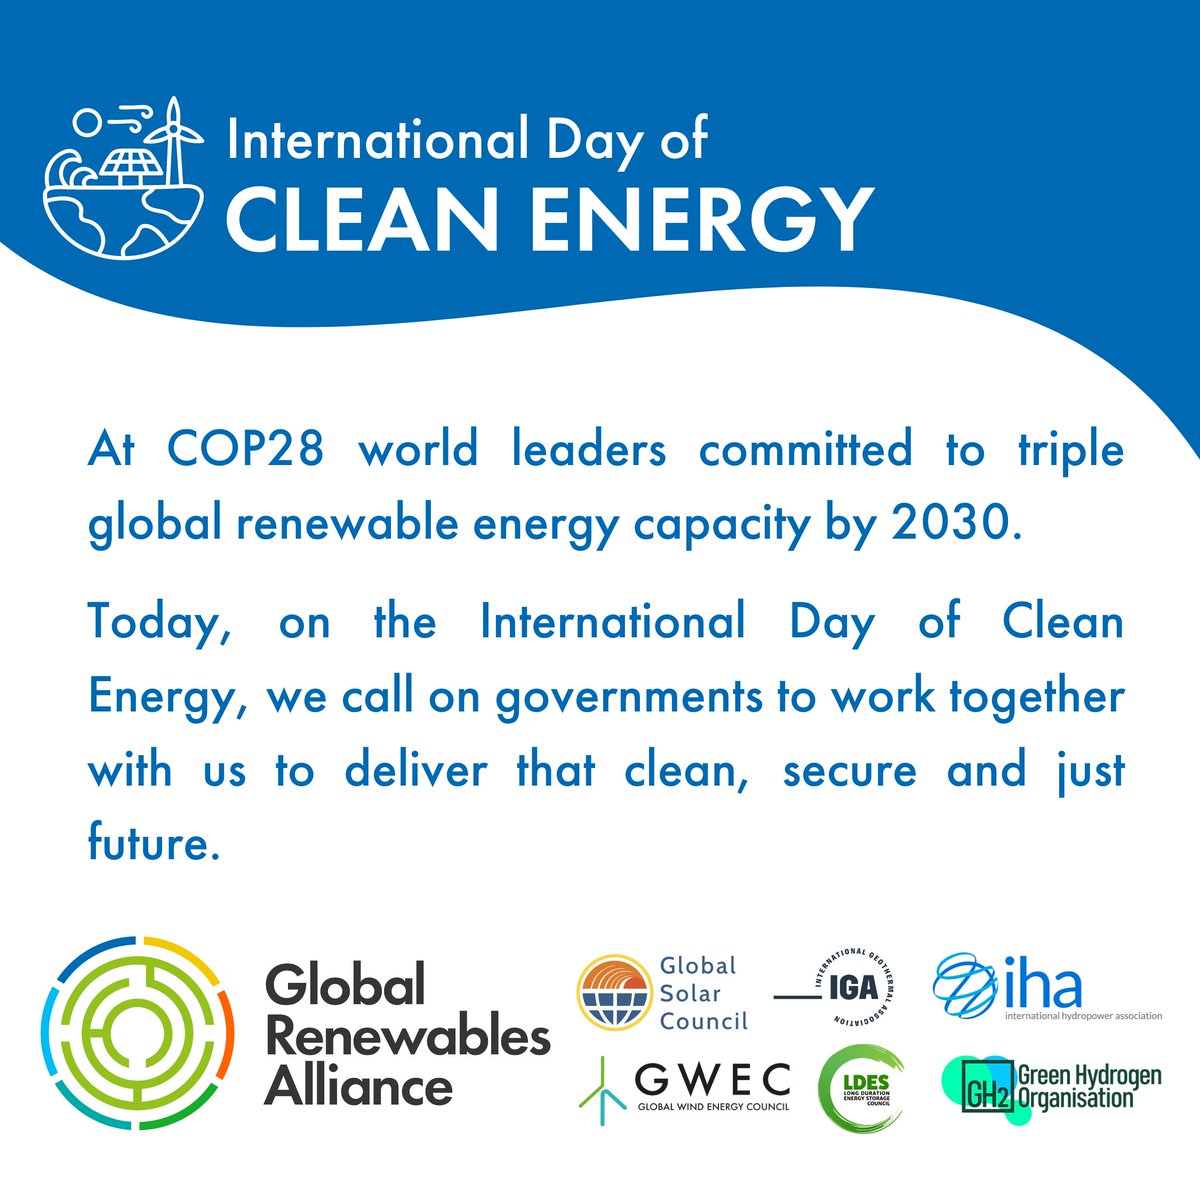 International Day of Clean Energy - time to deliver #3xRenewables!

#InternationalDayofCleanEnergy #RenewablesNow
@LDESCouncil @GWECGlobalWind @GSolarCouncil @iha_org @gh2org @lovegeothermal